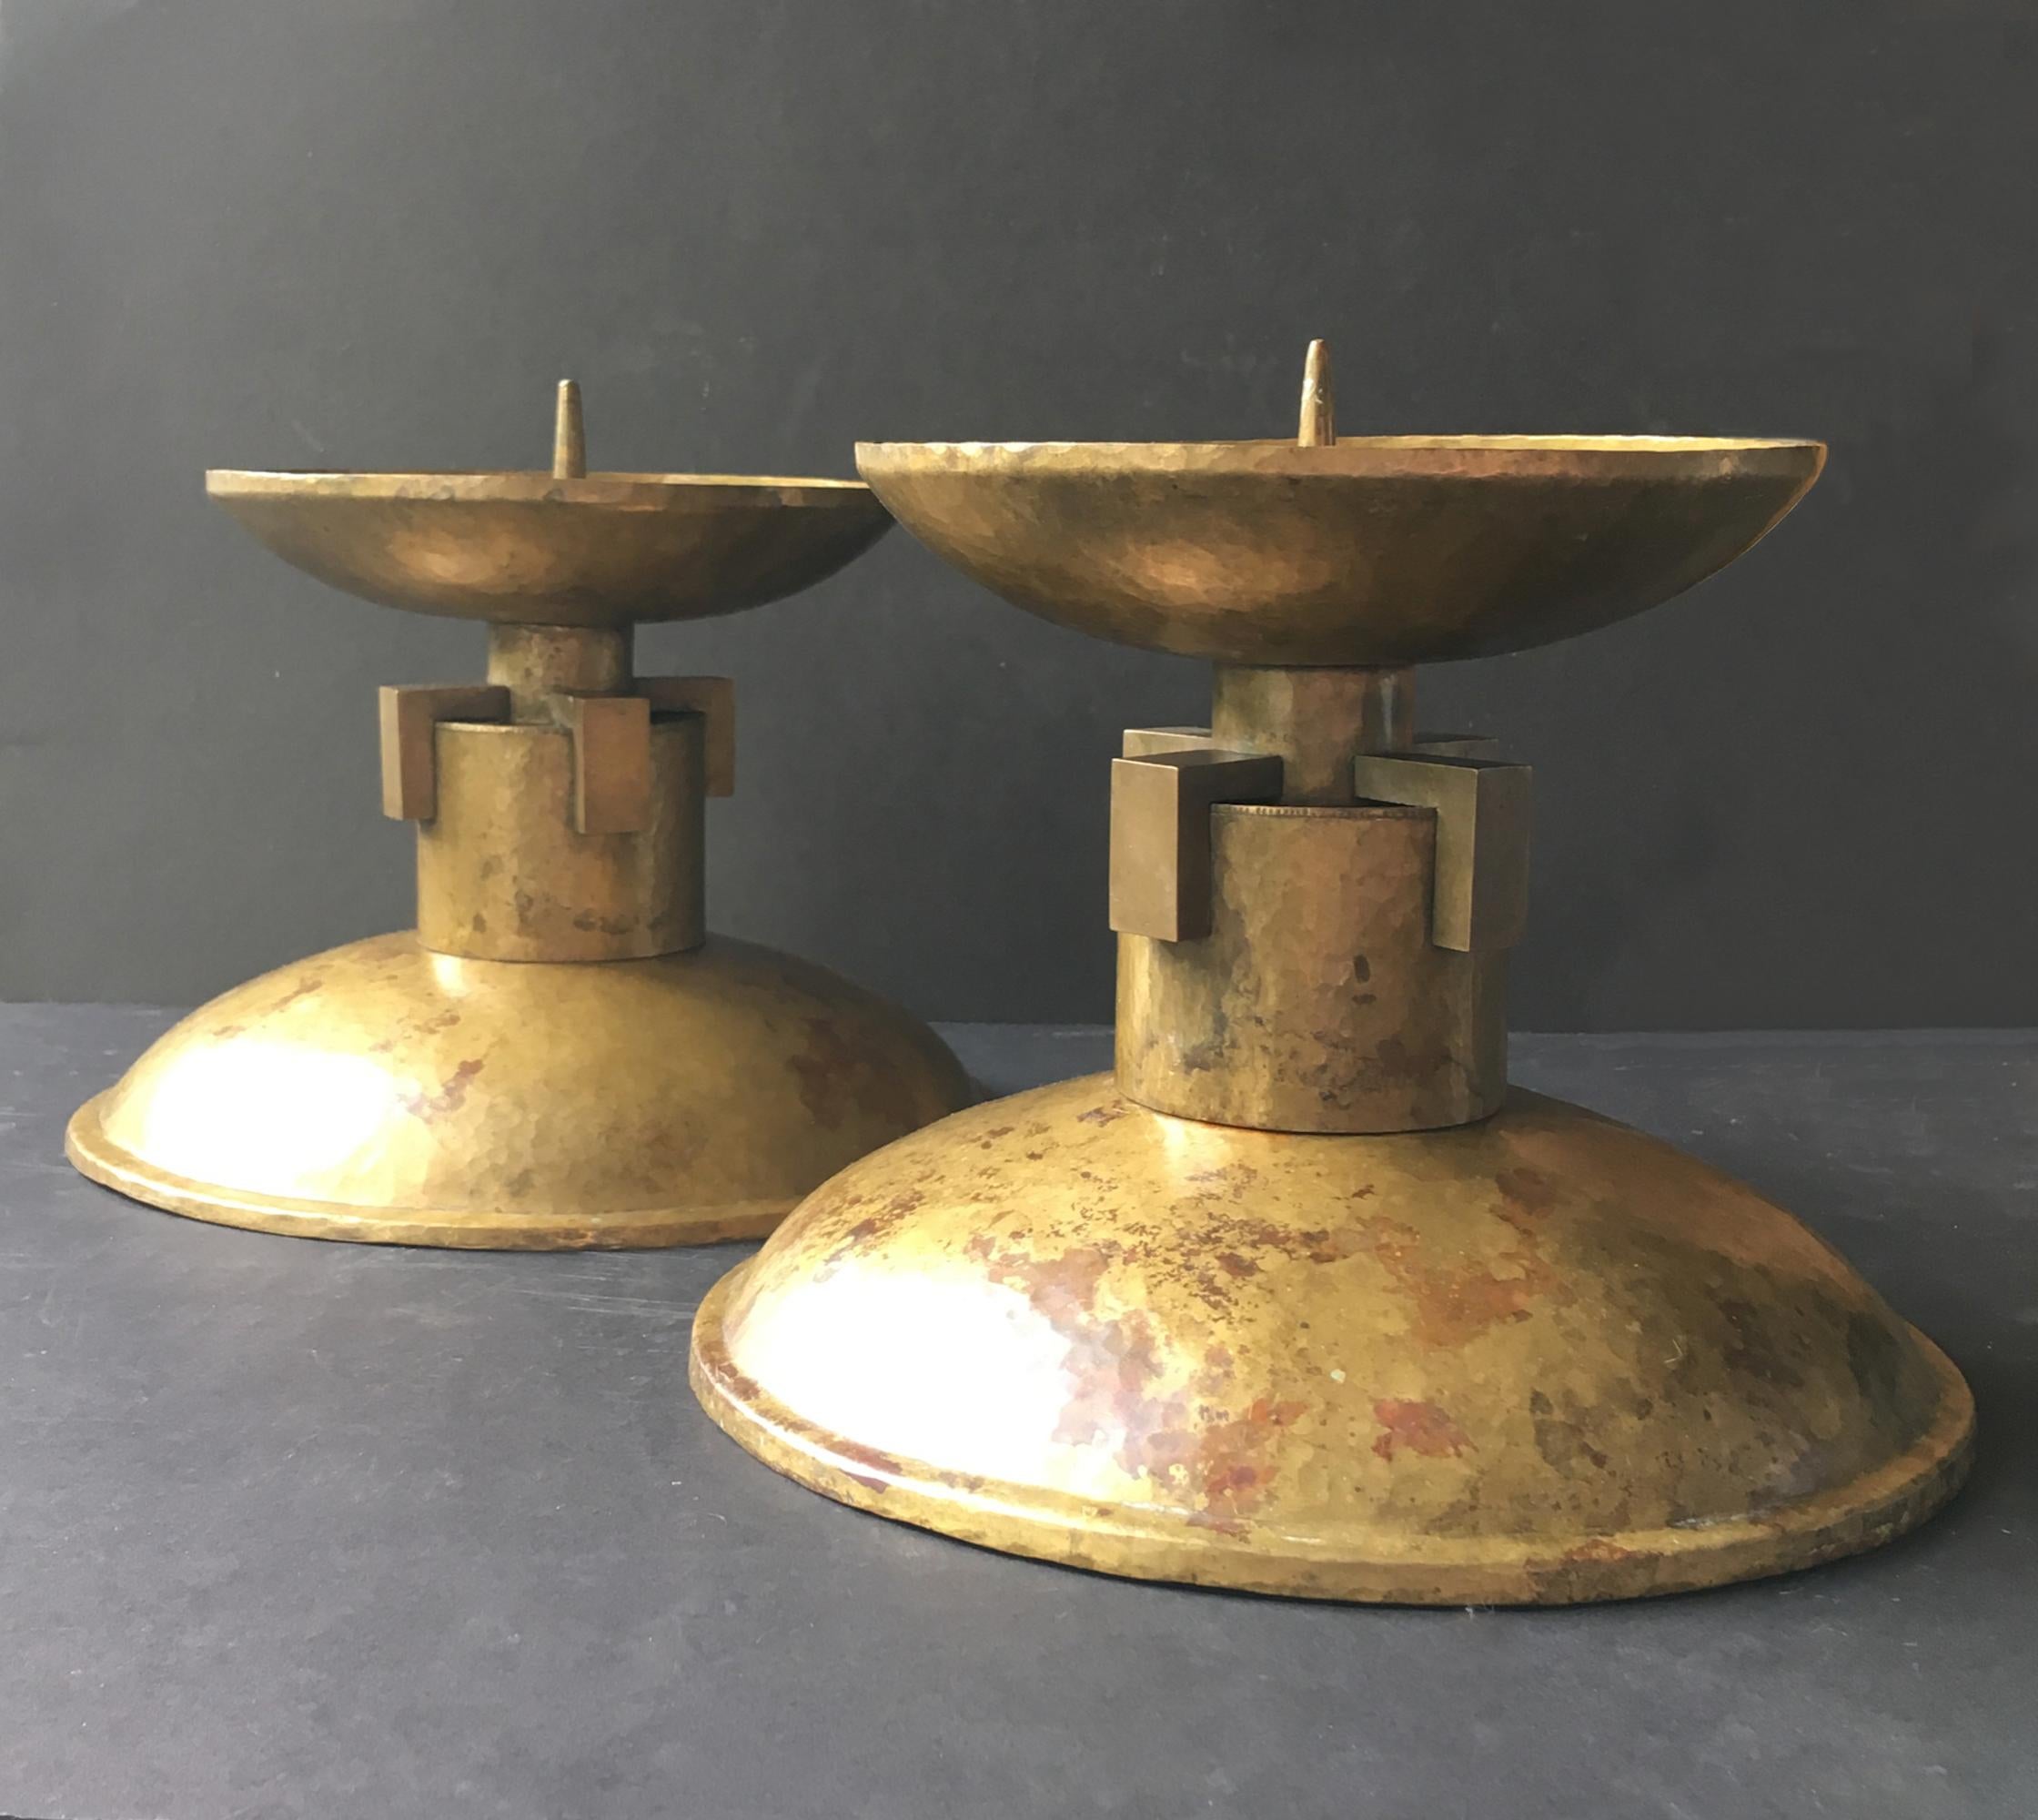 Pair of very large Art Deco candleholders with square milled brass details on the stem, early to mid-20th century, European.

The main body of each piece is made of hammered brass, or possibly gilt bronze, giving a mellow tone to the finish, which